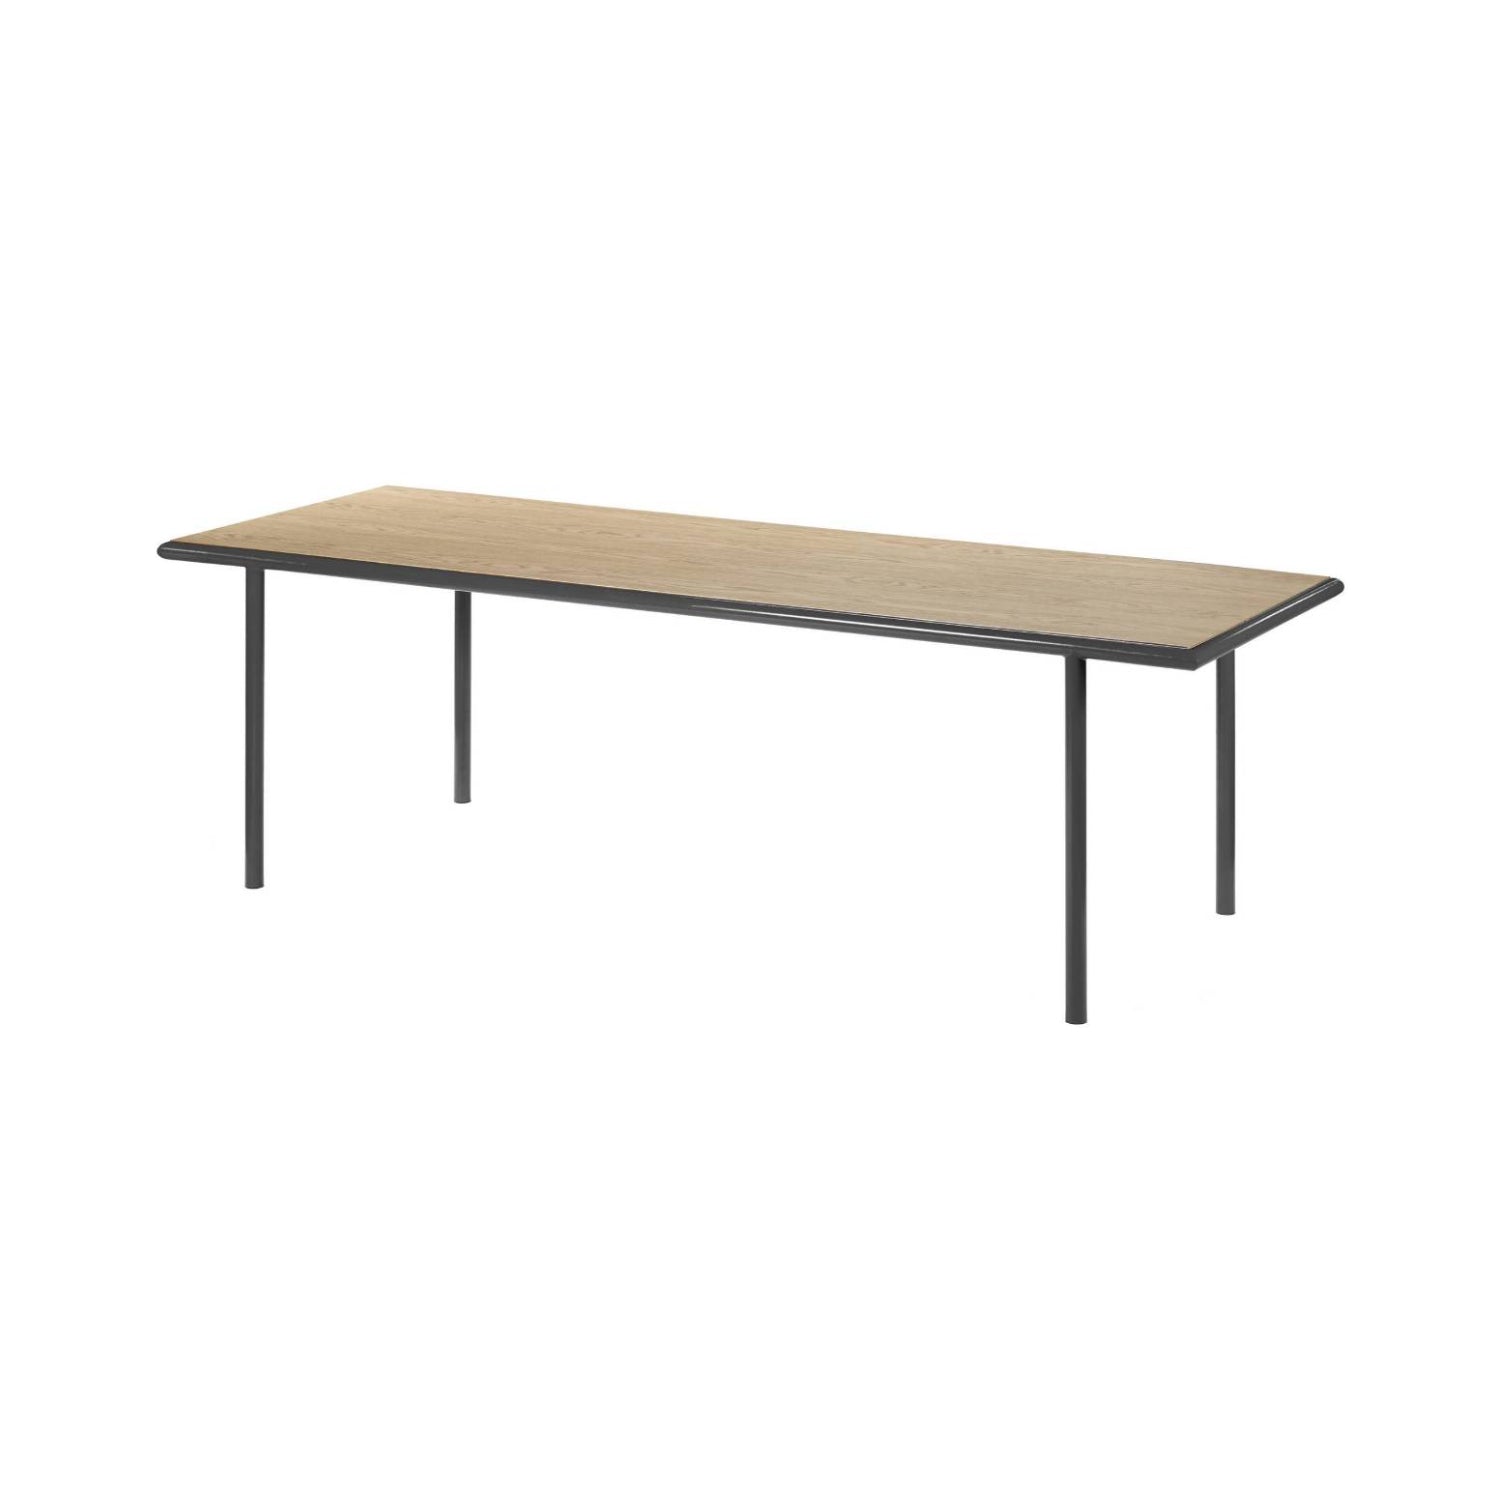 Wooden Table: Rectangular + Small - 94.5